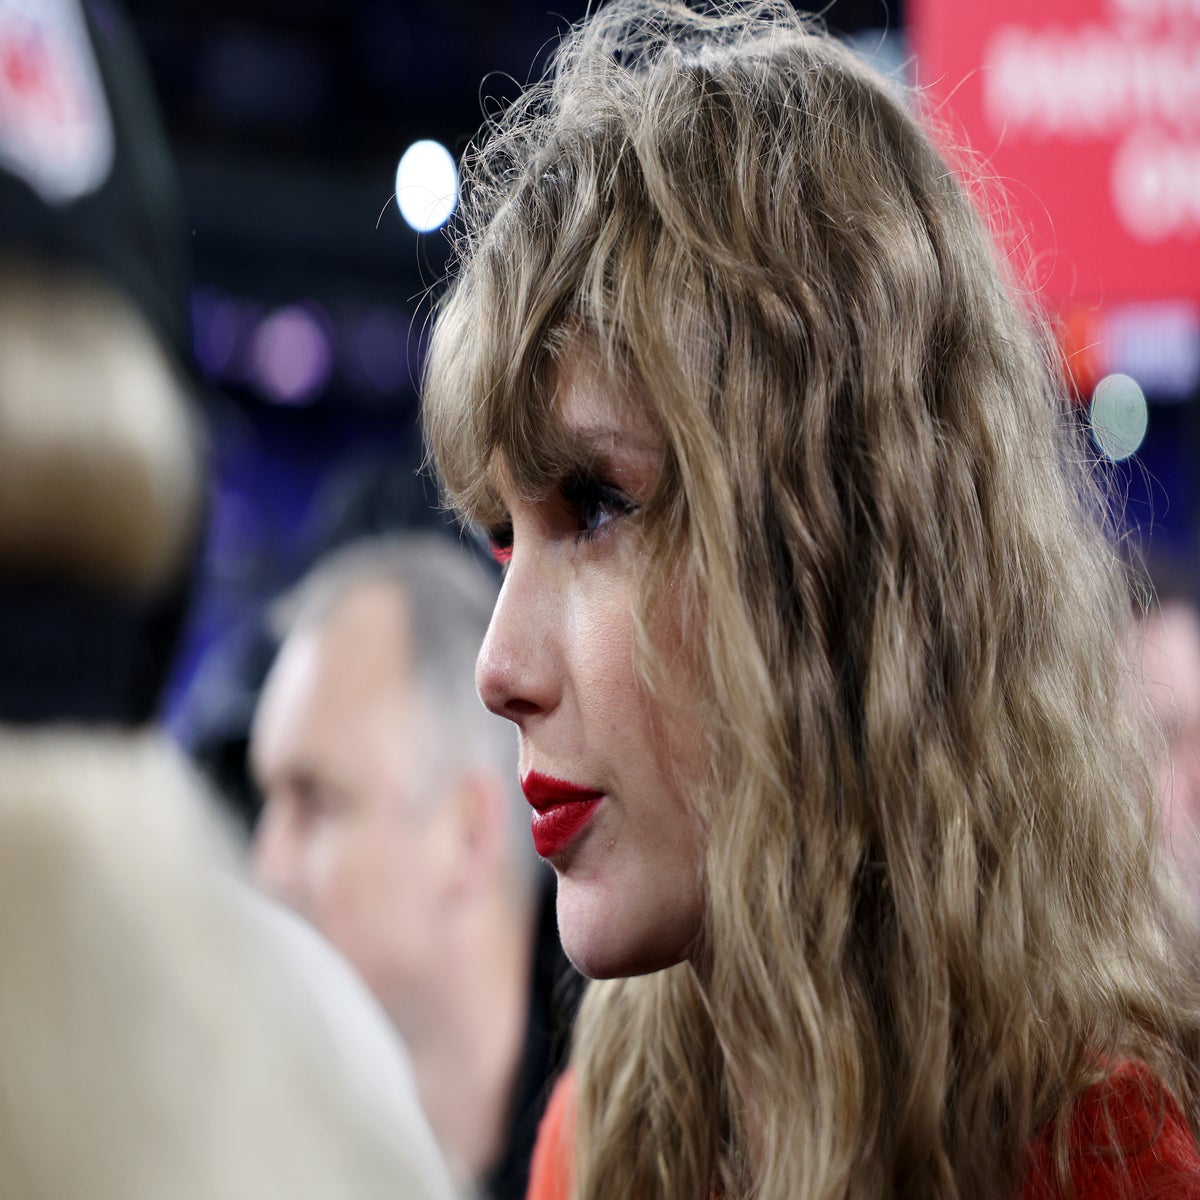 X blocks Taylor Swift searches as explicit AI deepfakes of singer